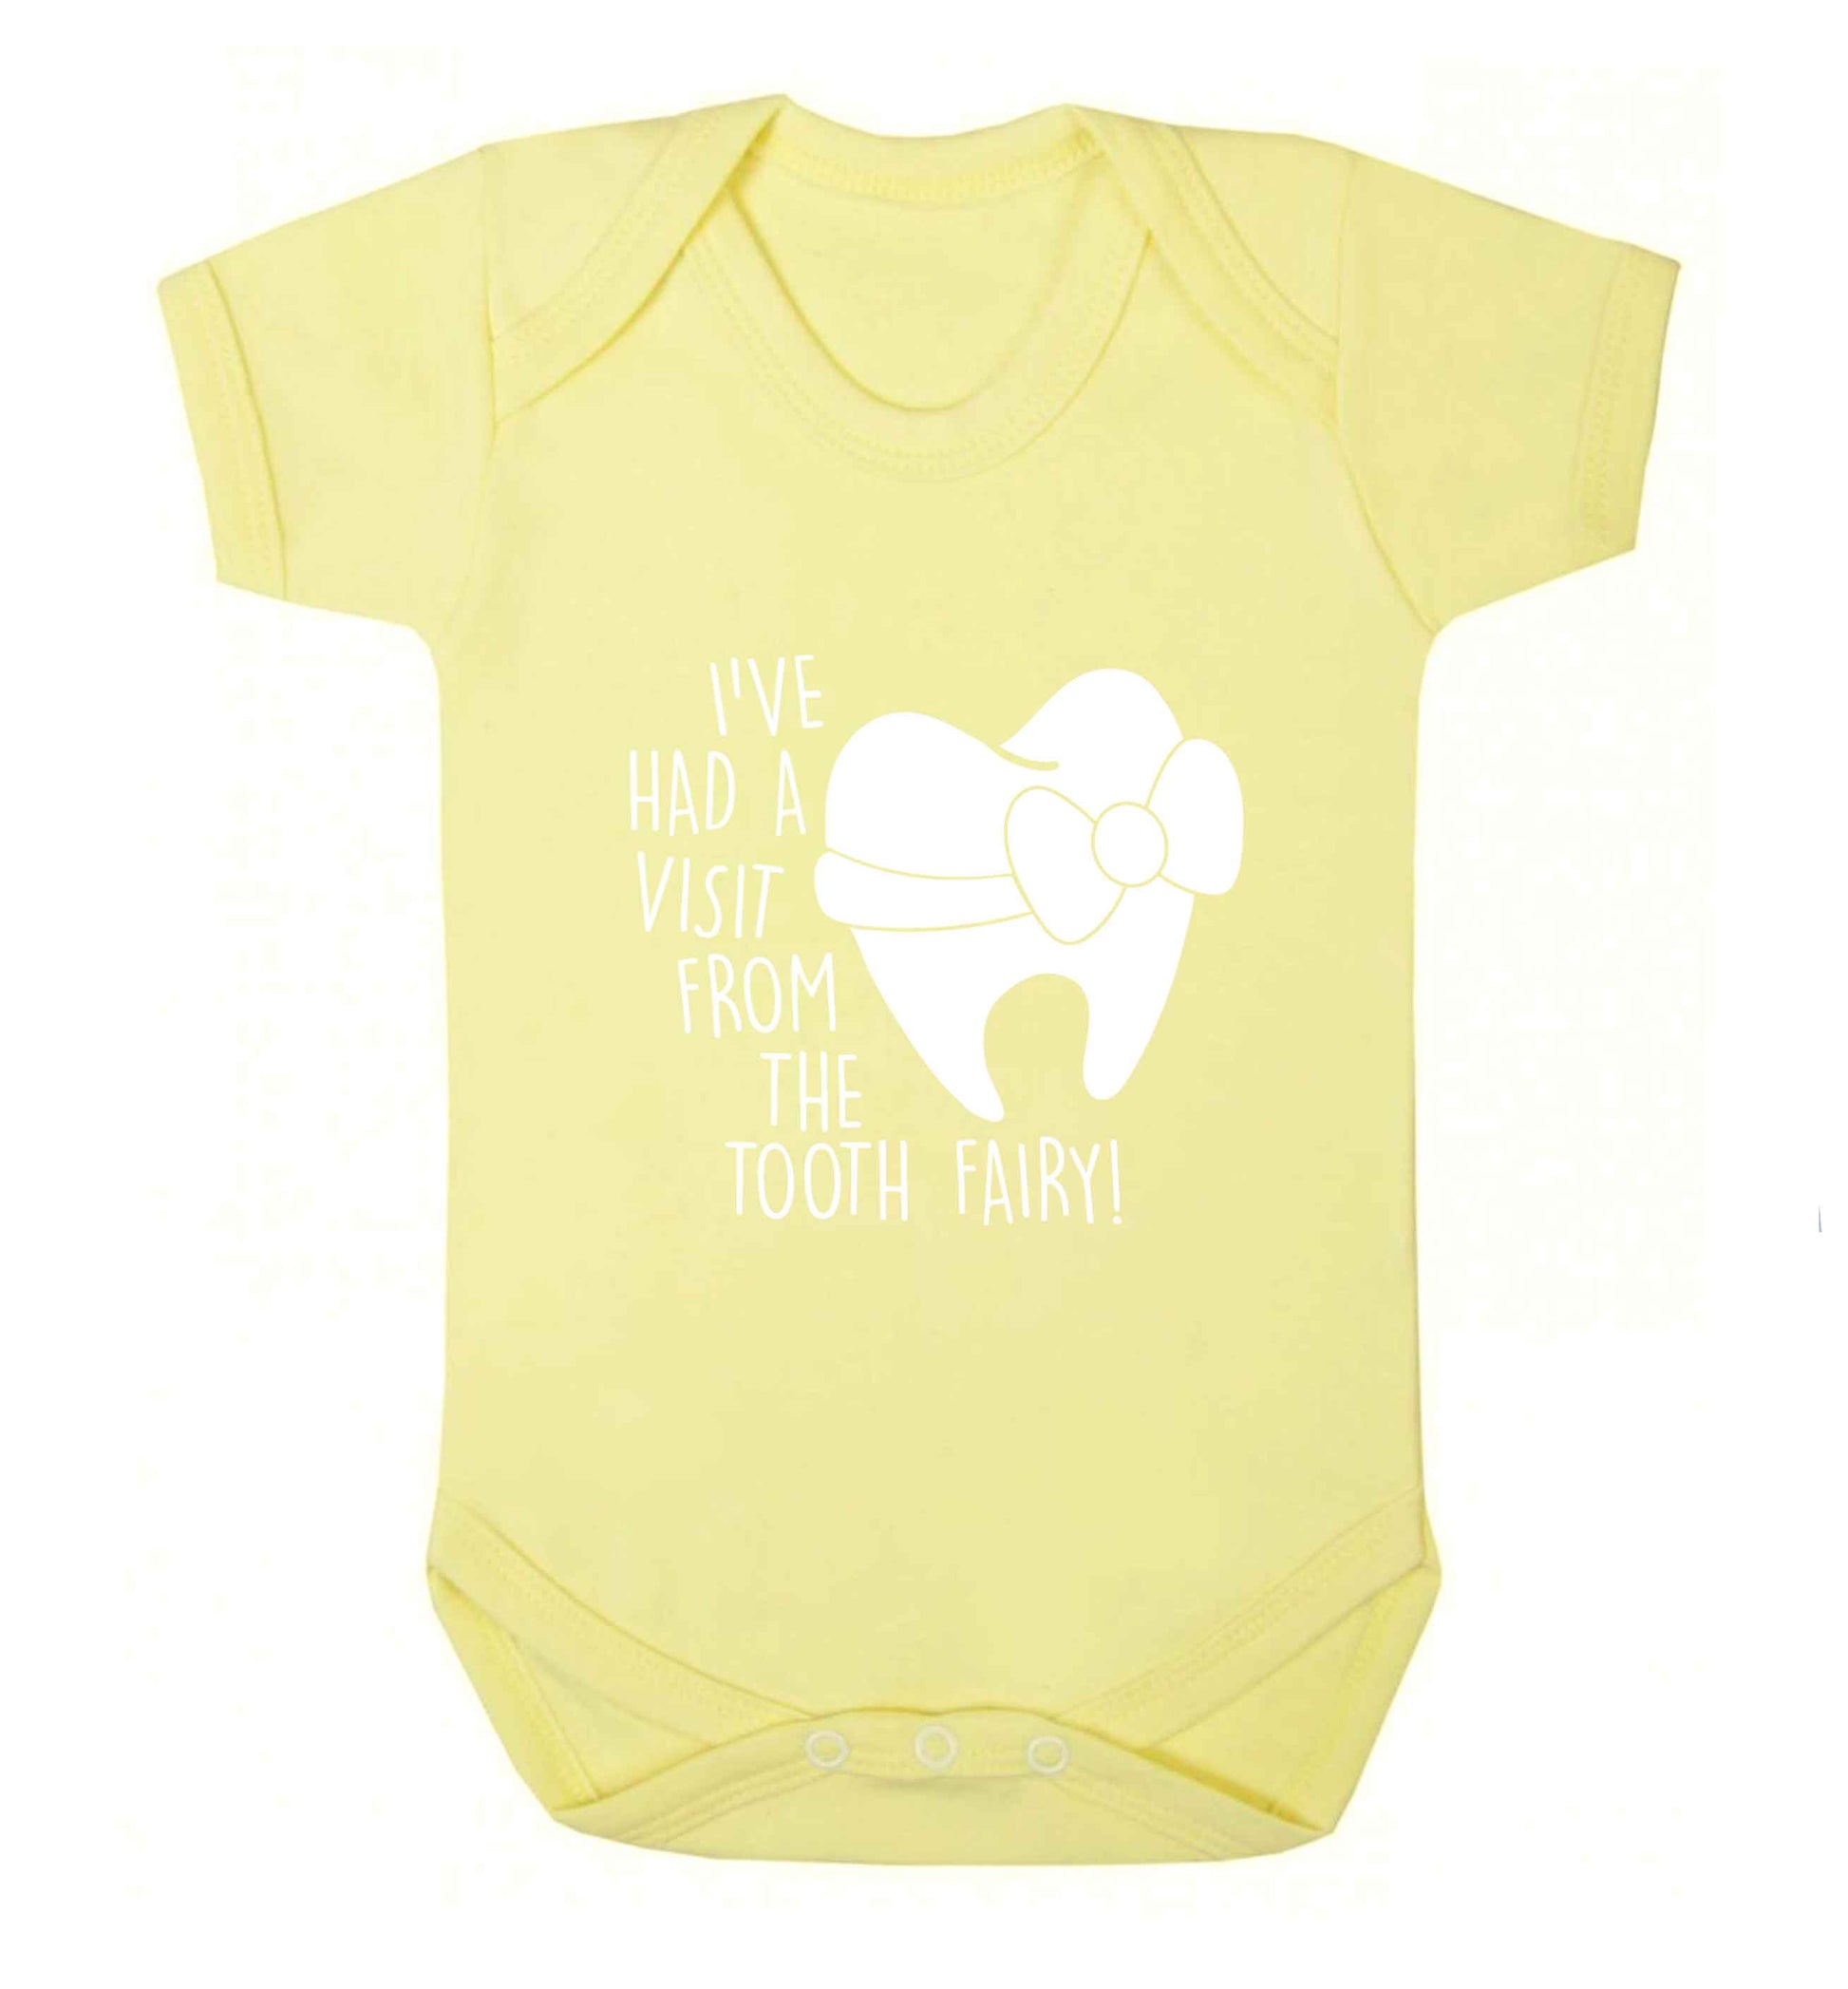 Visit From Tooth Fairy baby vest pale yellow 18-24 months